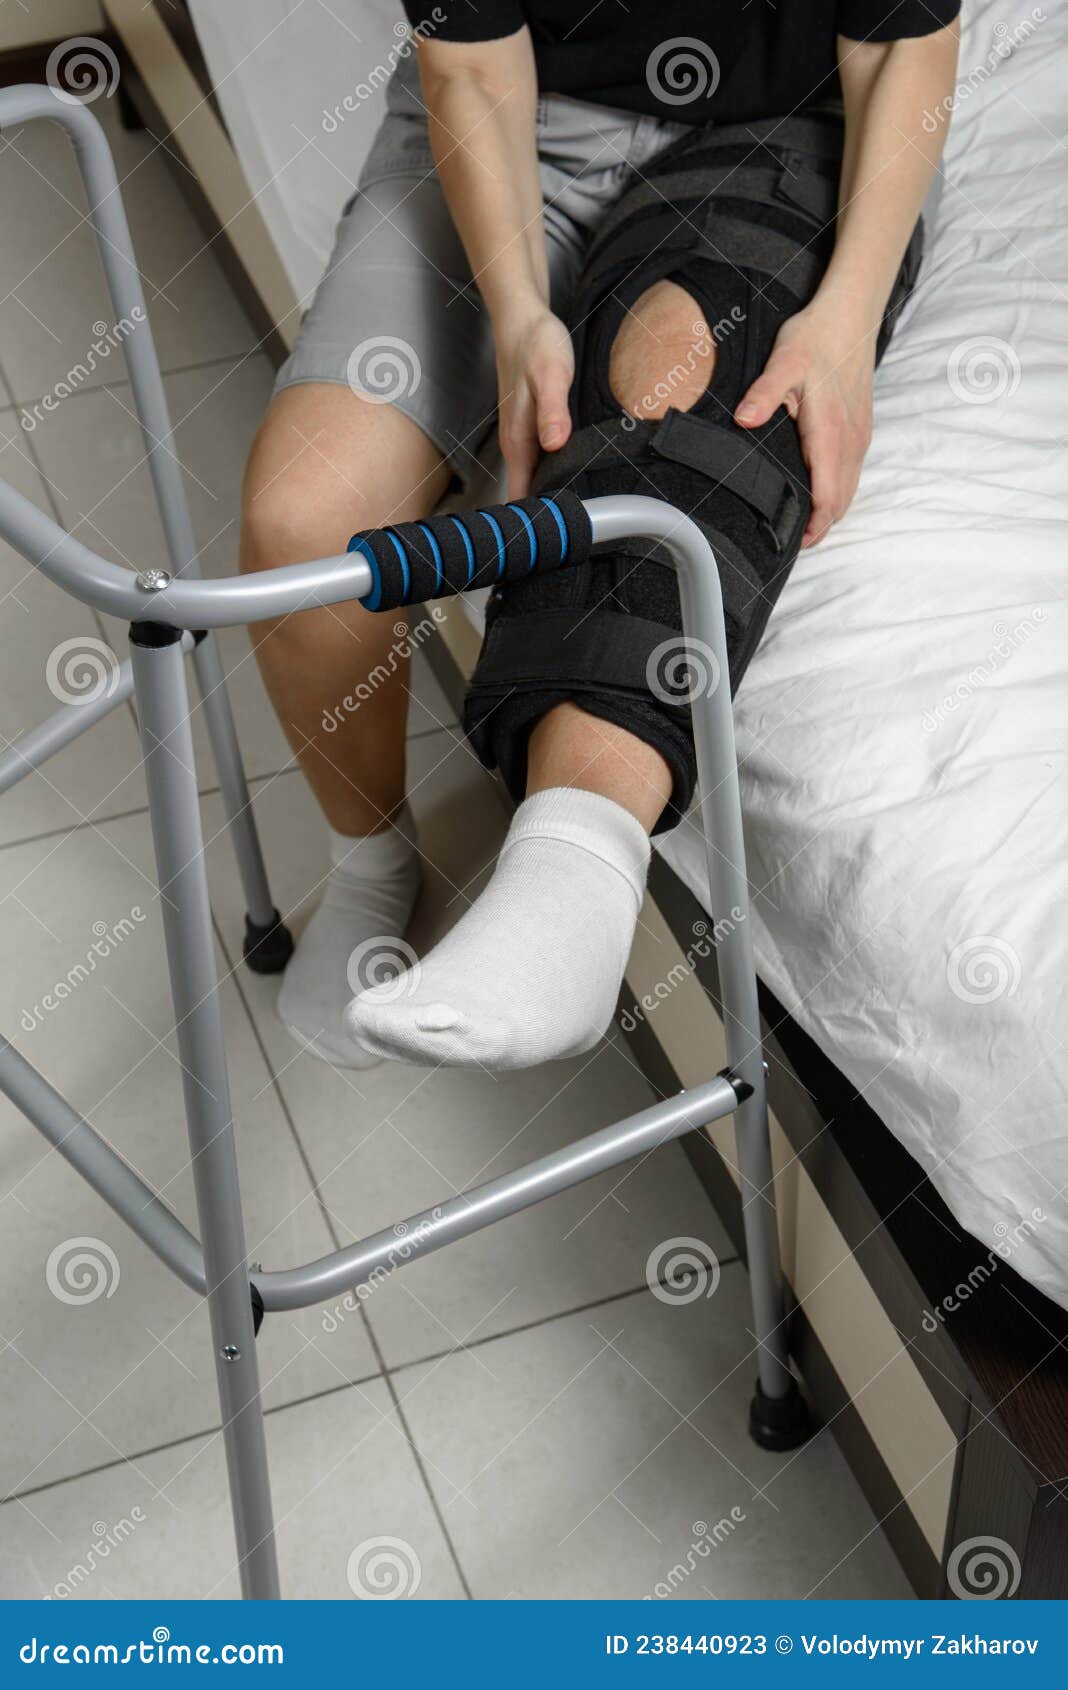 Woman Wearing Knee Brace after Leg Fracture Sitting on Bed Trying To Get Up  with Walker. Recovery after Surgery Stock Image - Image of install, plate:  238440923